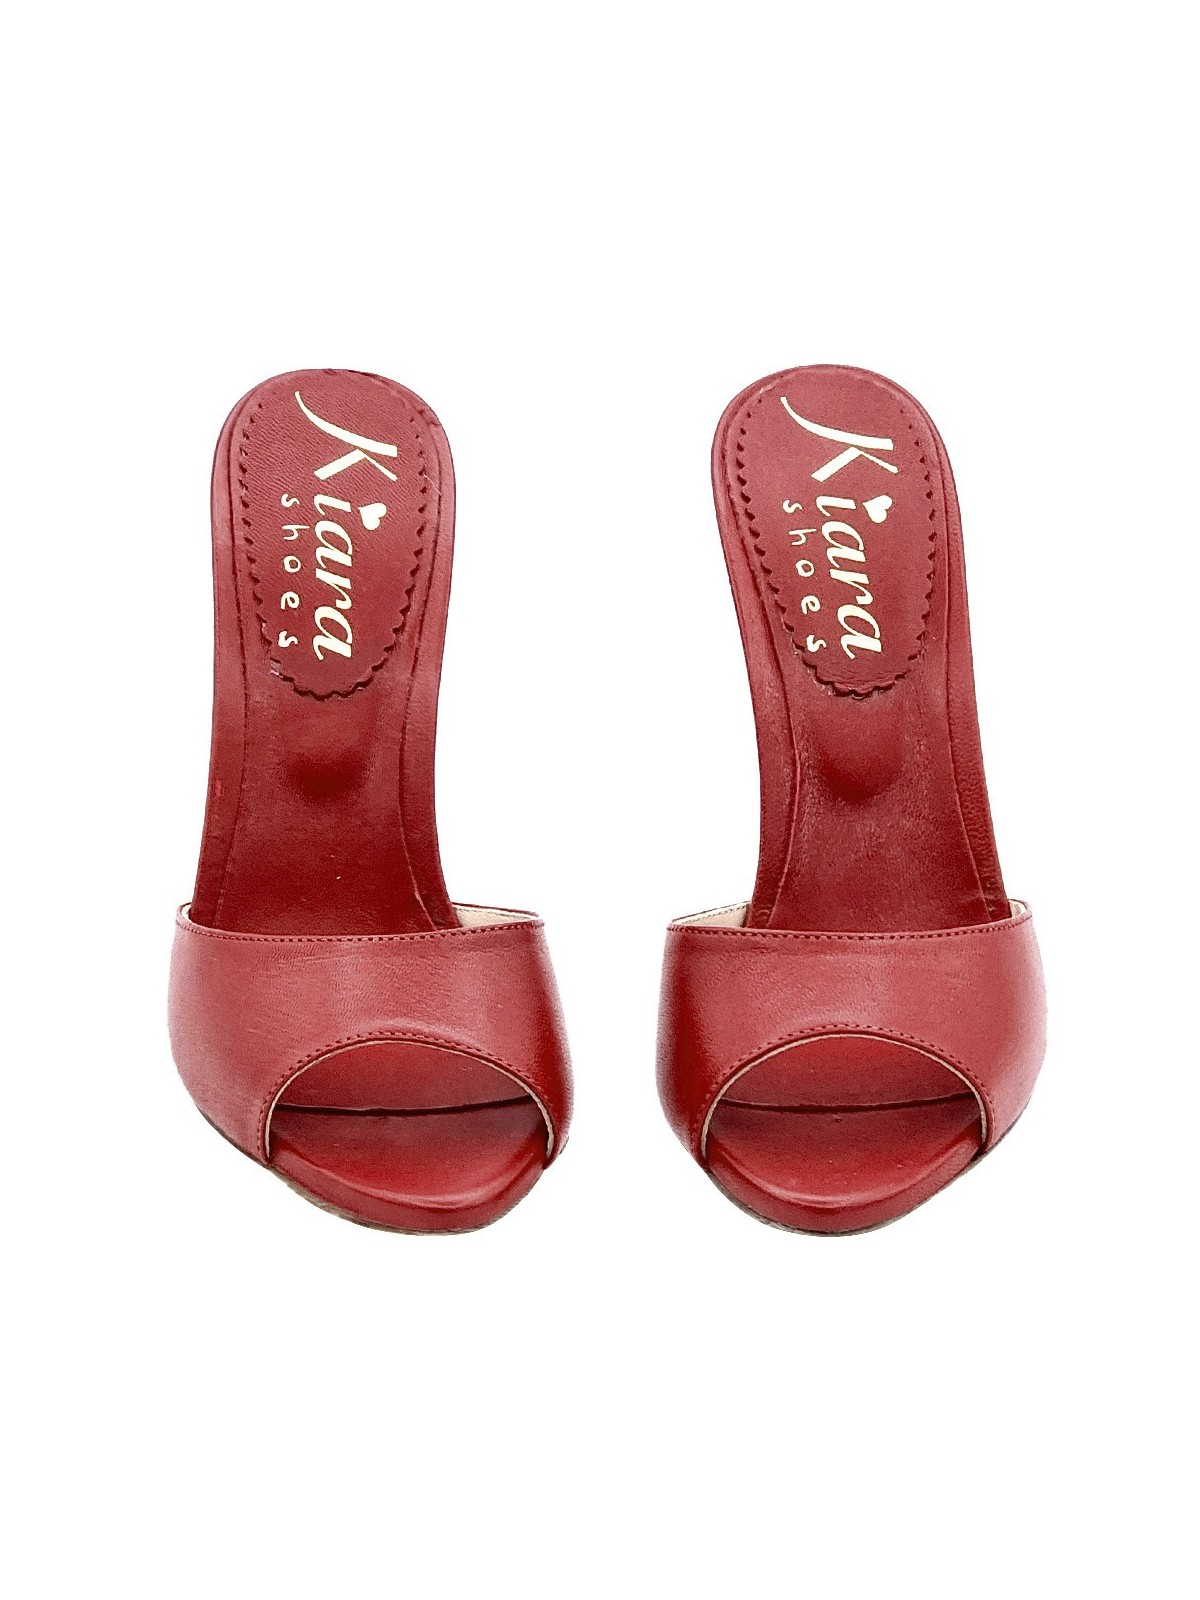 RED LEATHER CLOGS WITH STILETTO